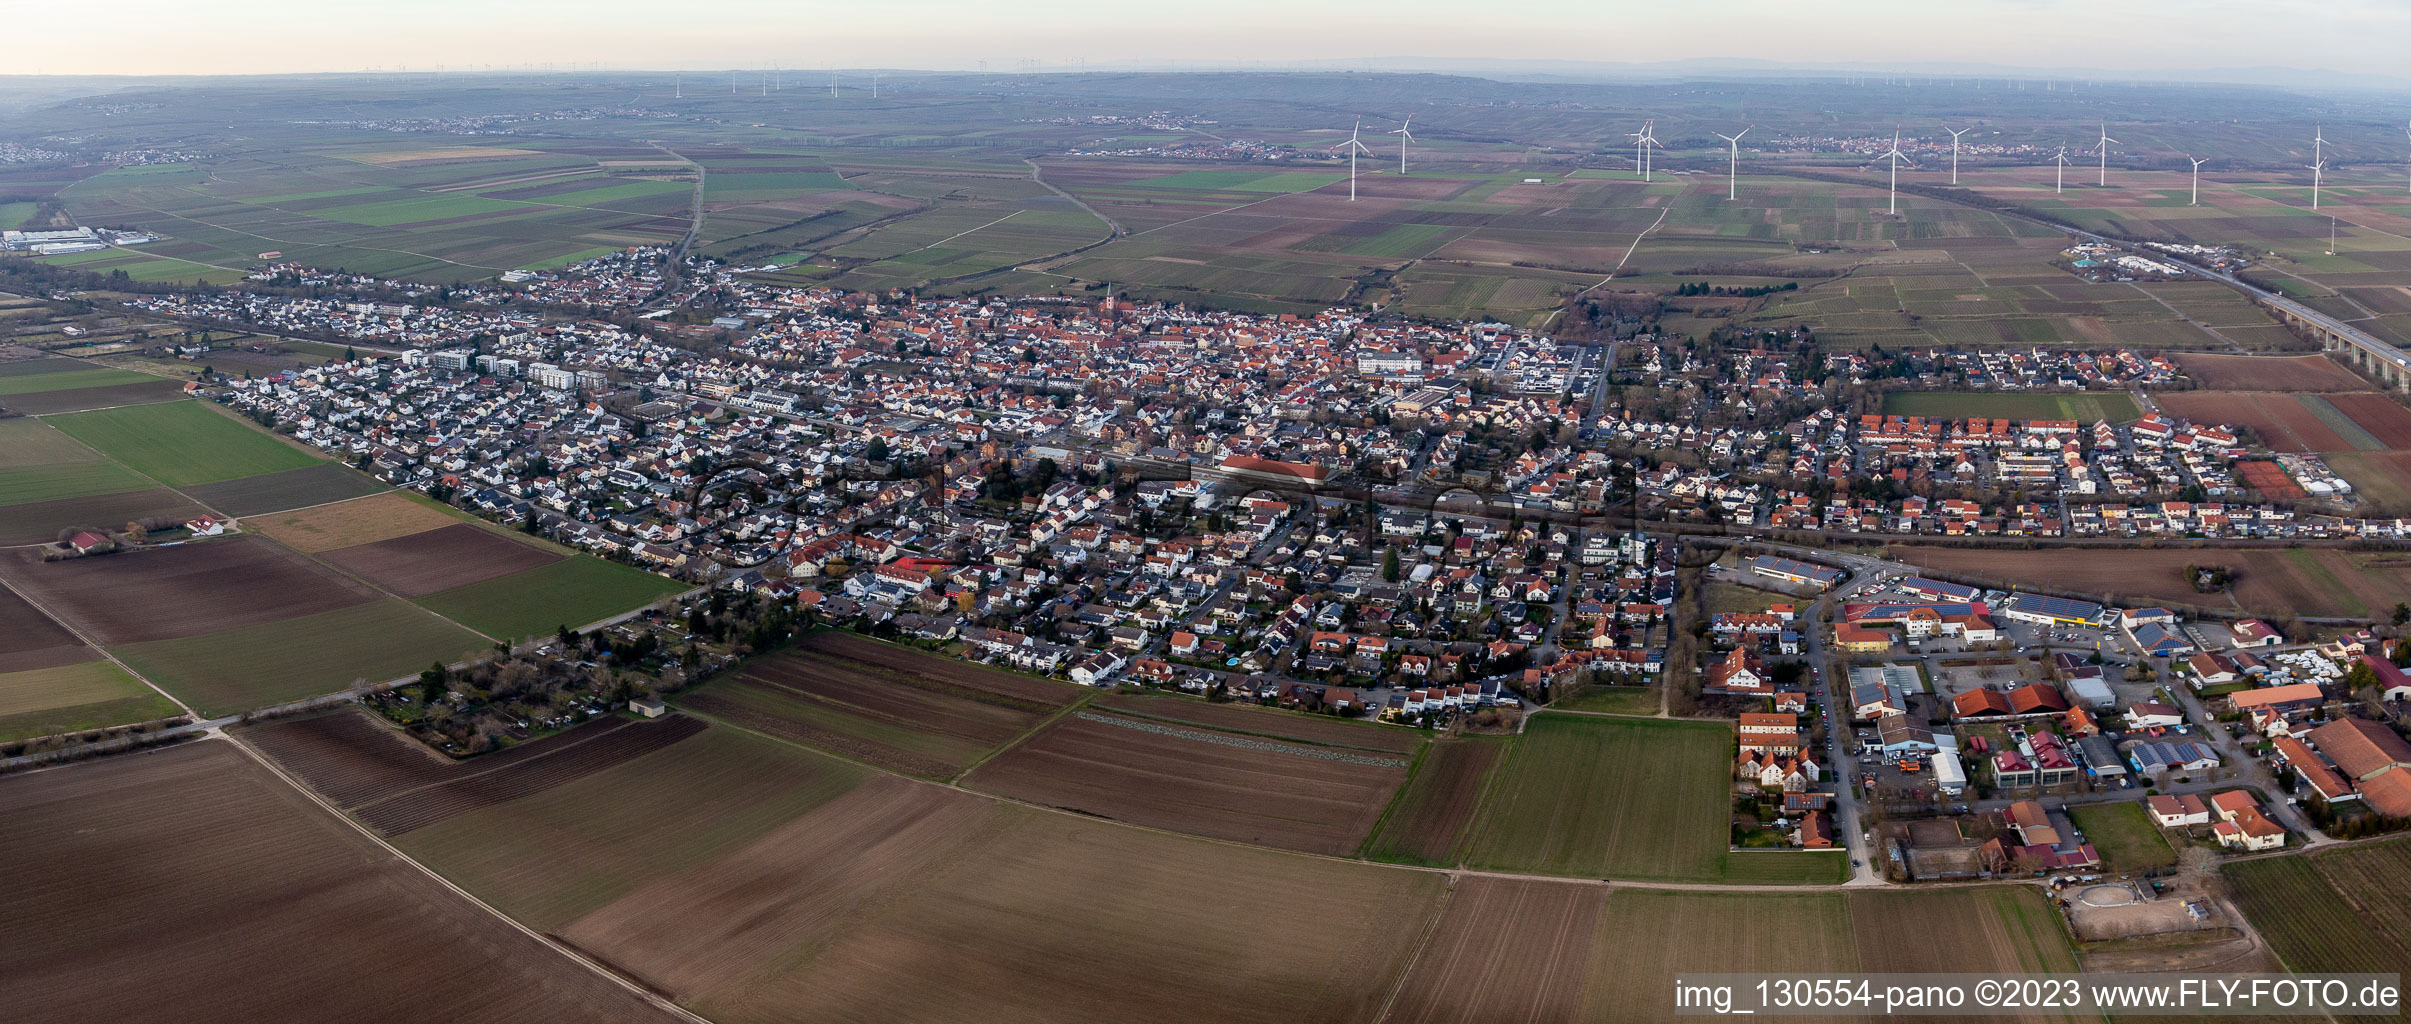 District Pfeddersheim in Worms in the state Rhineland-Palatinate, Germany out of the air